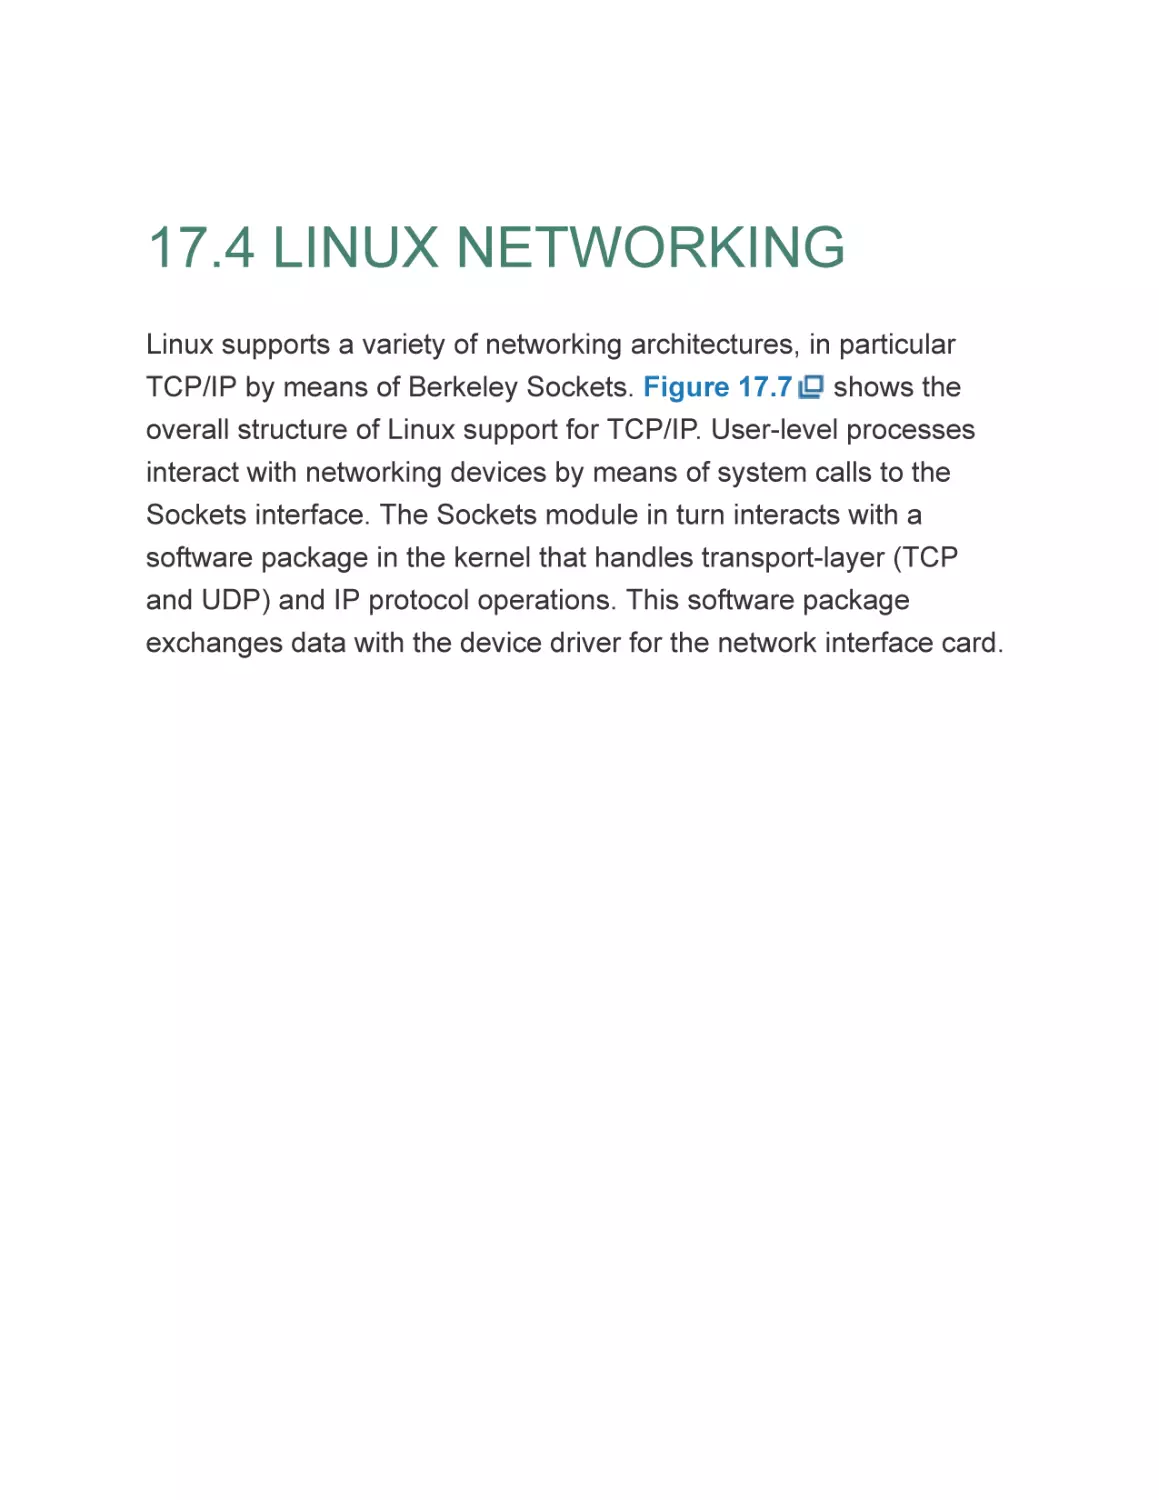 17.4 LINUX NETWORKING